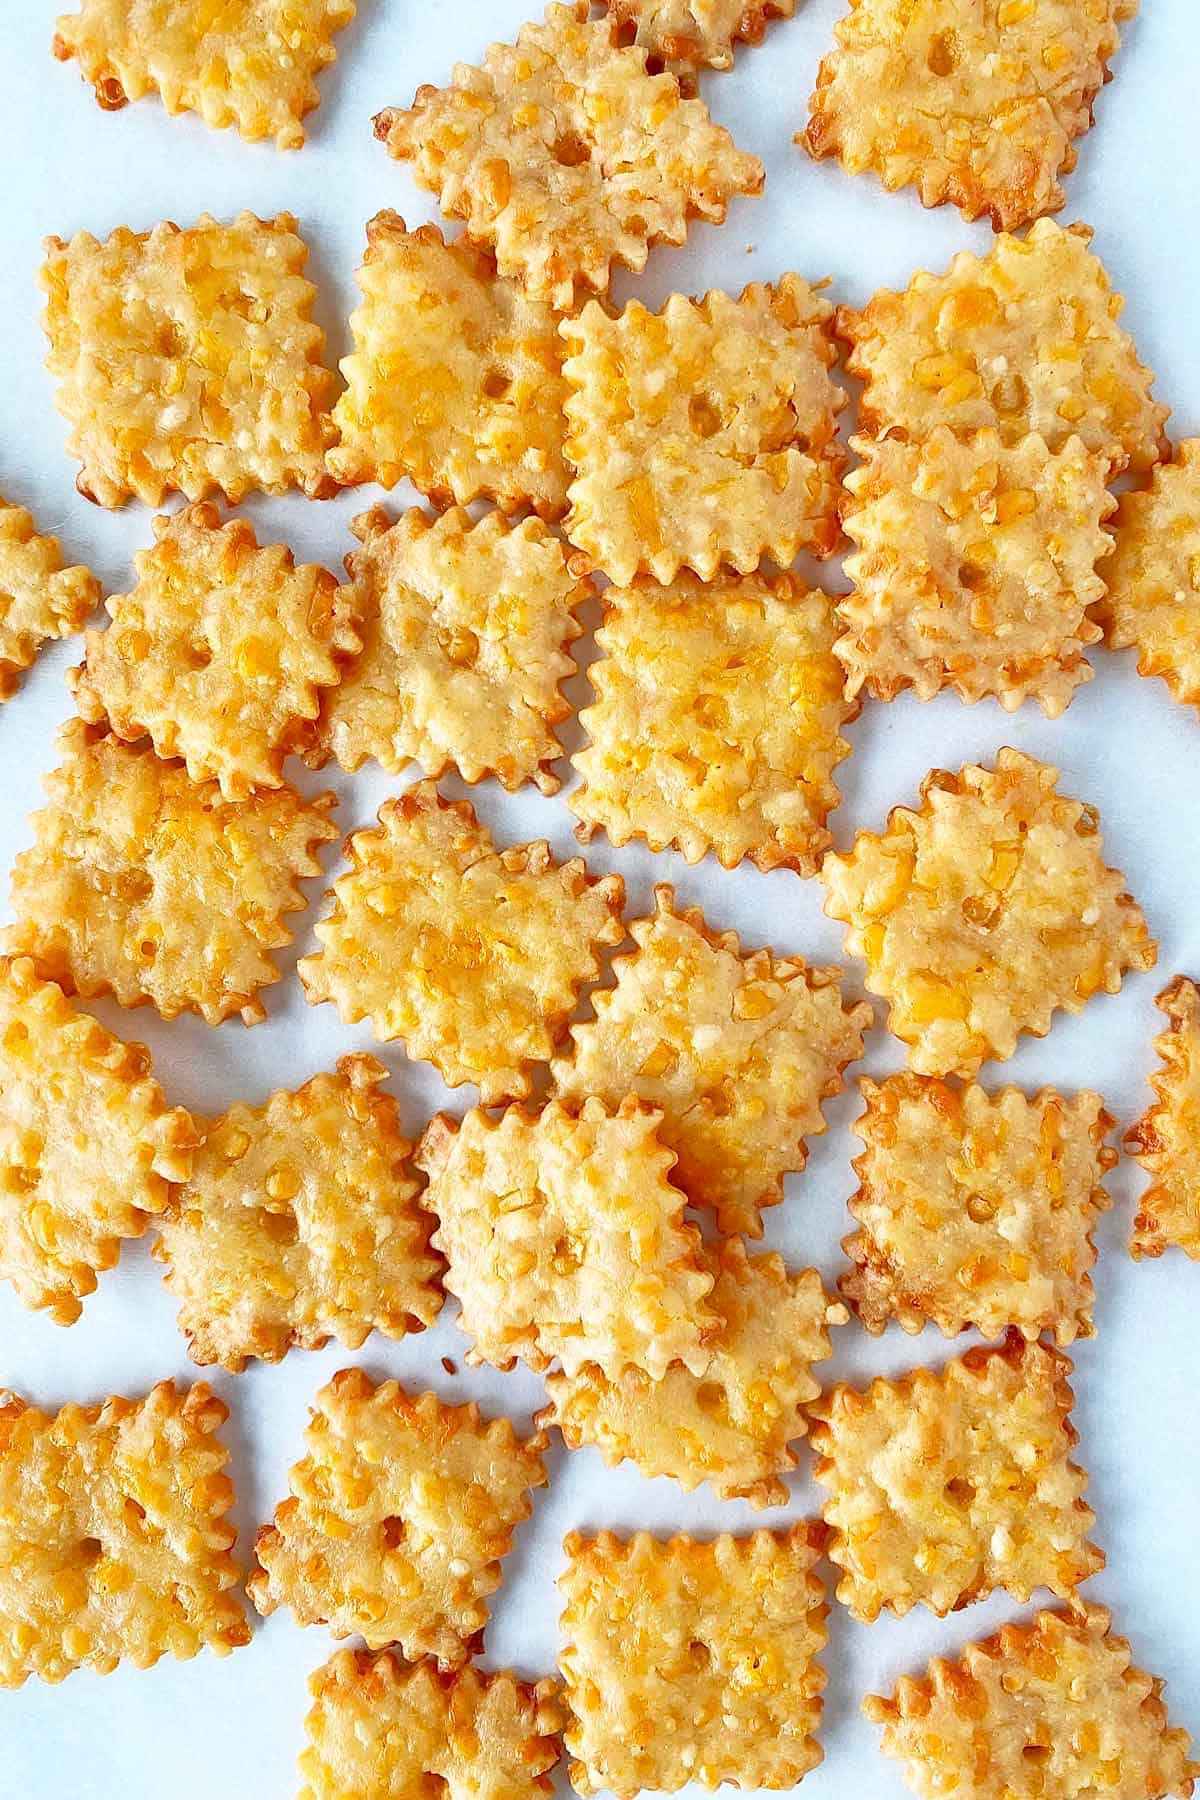 Baked homemade cheez it crackers ready for eating.